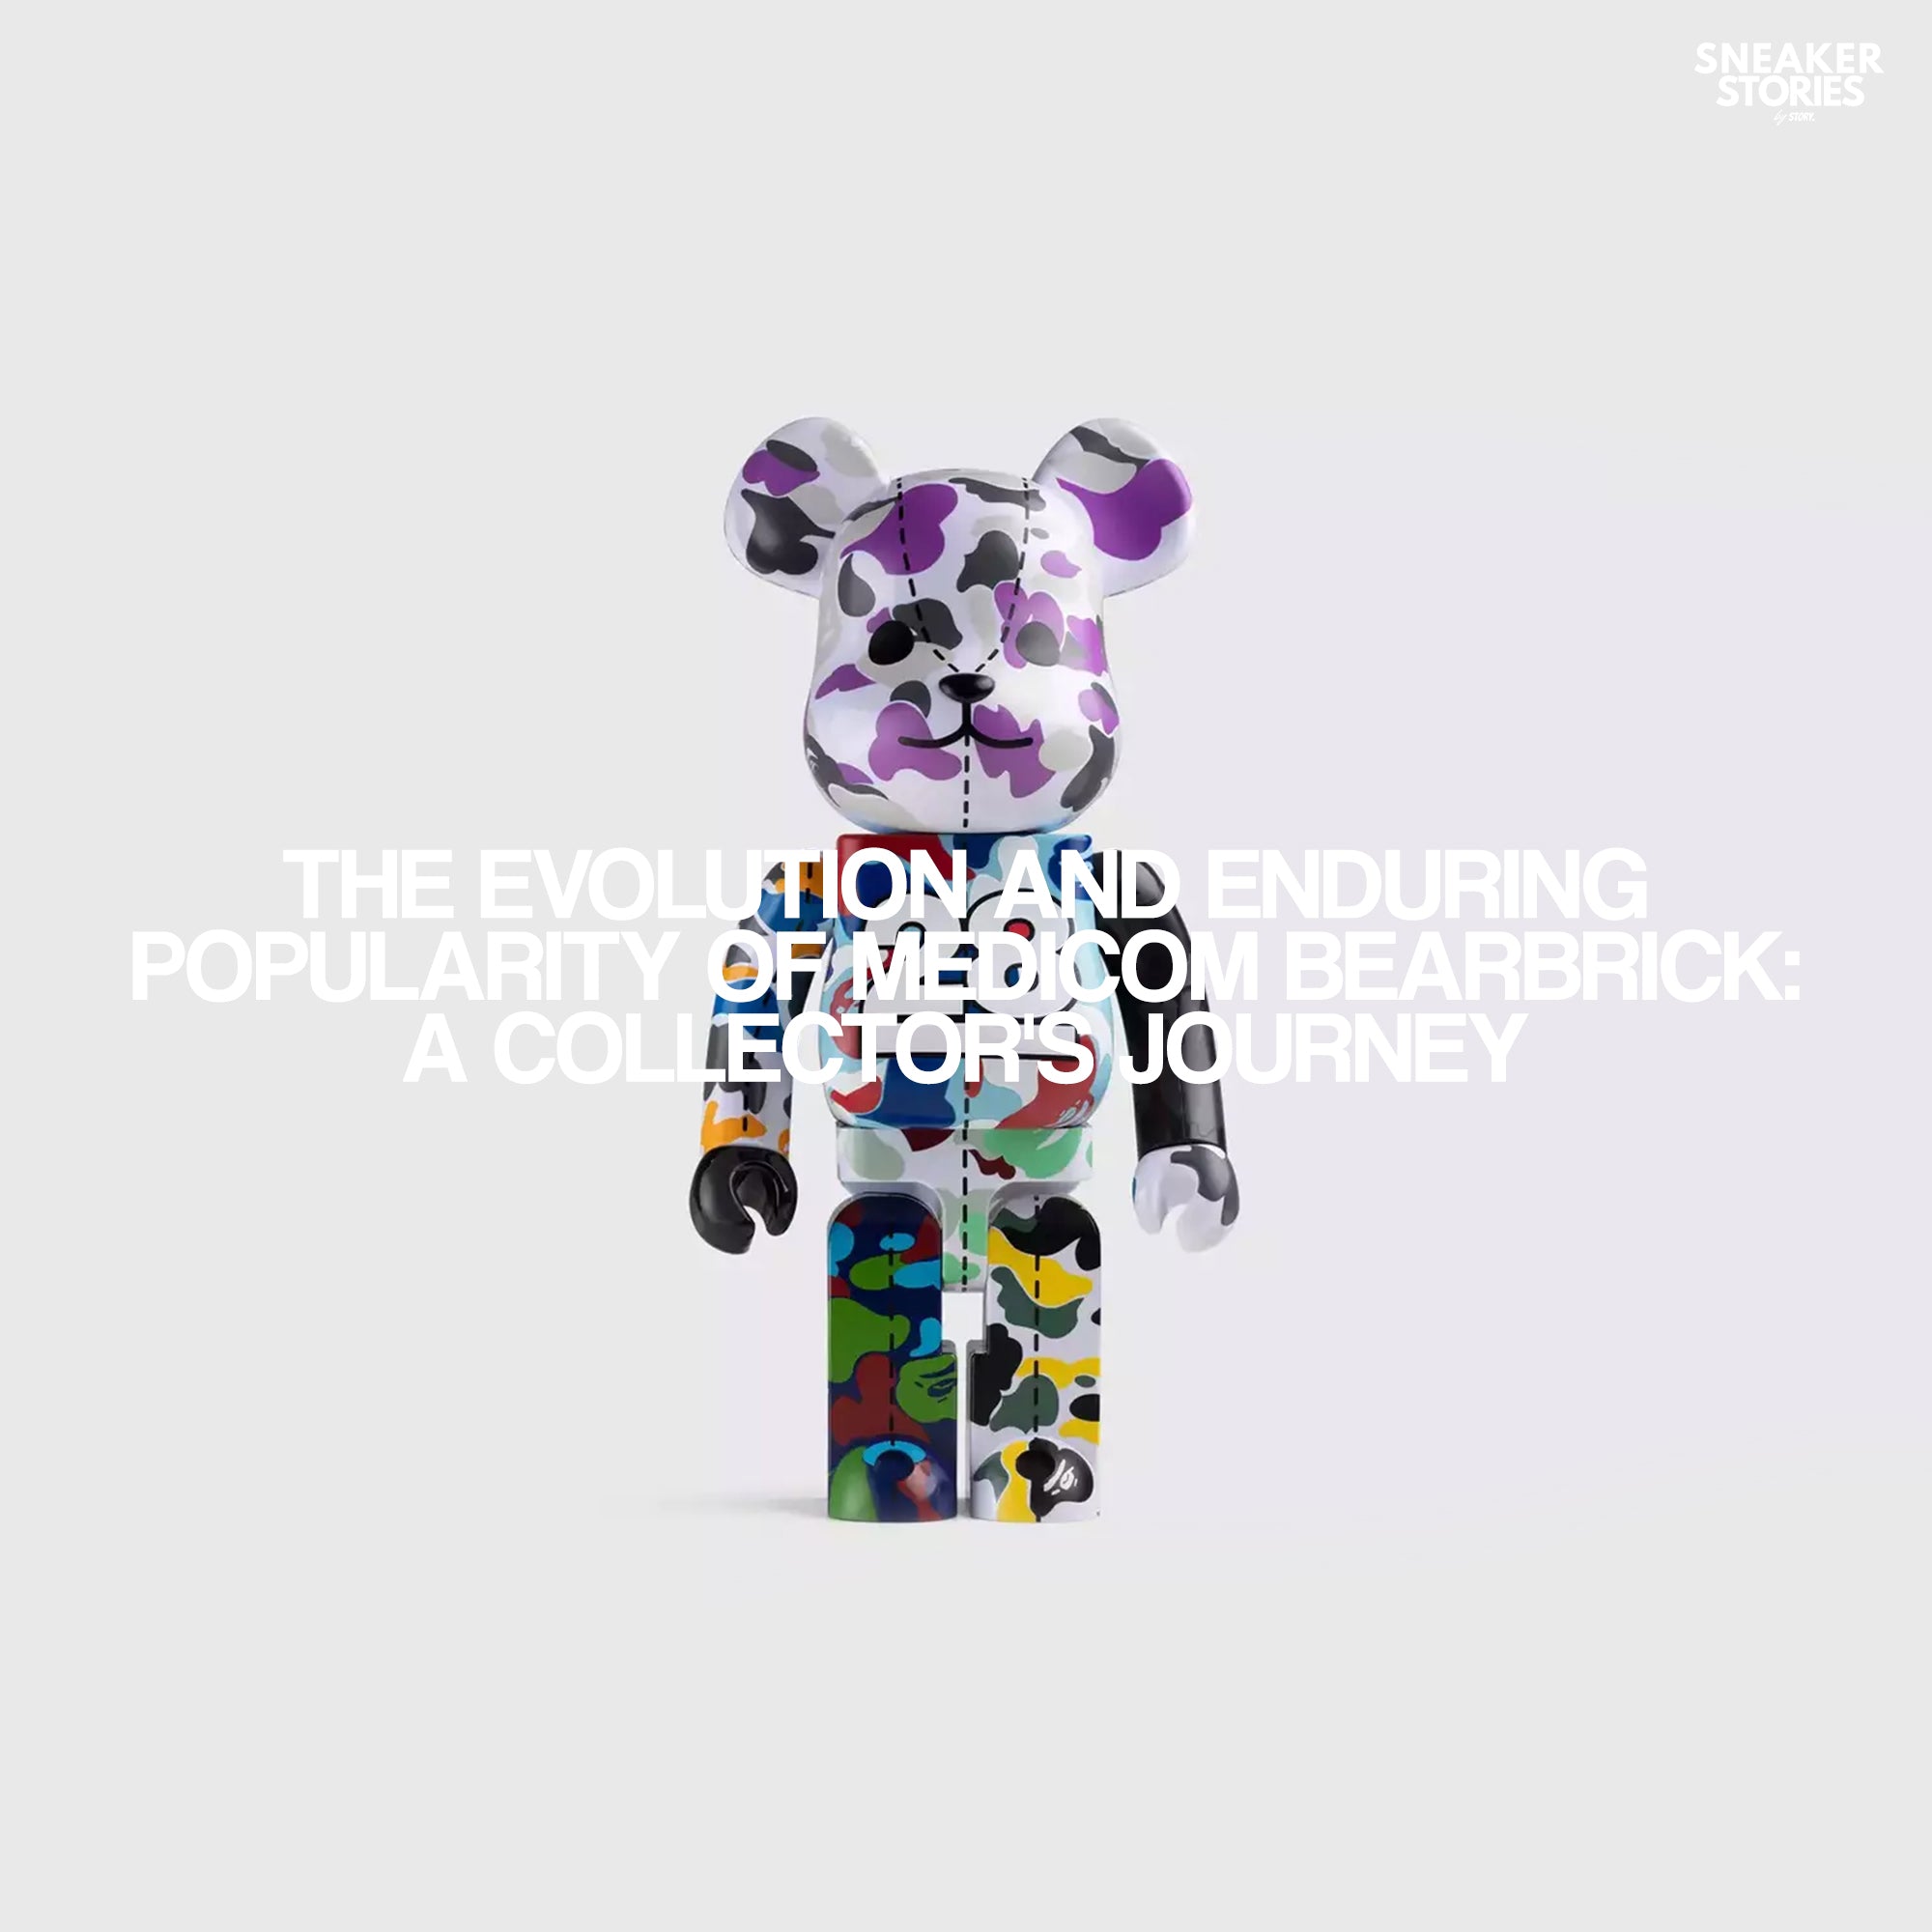 The Evolution and Enduring Popularity of Medicom Bearbrick: A Collector's Journey